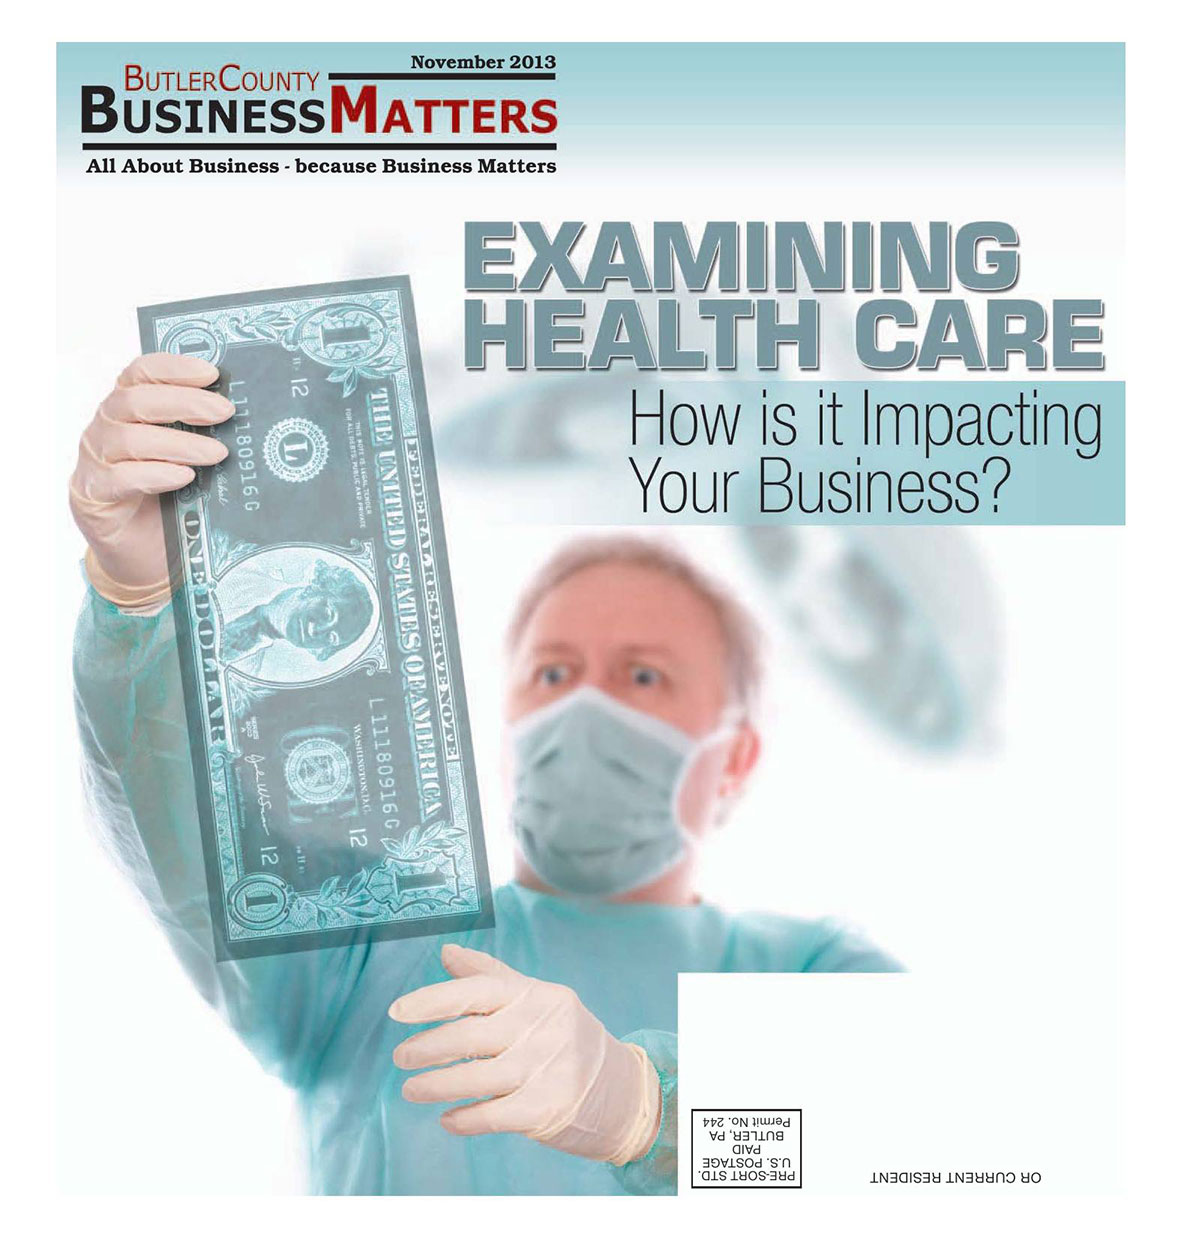 November 2013 - Examining Health Care - How is it Impacting Your Business?